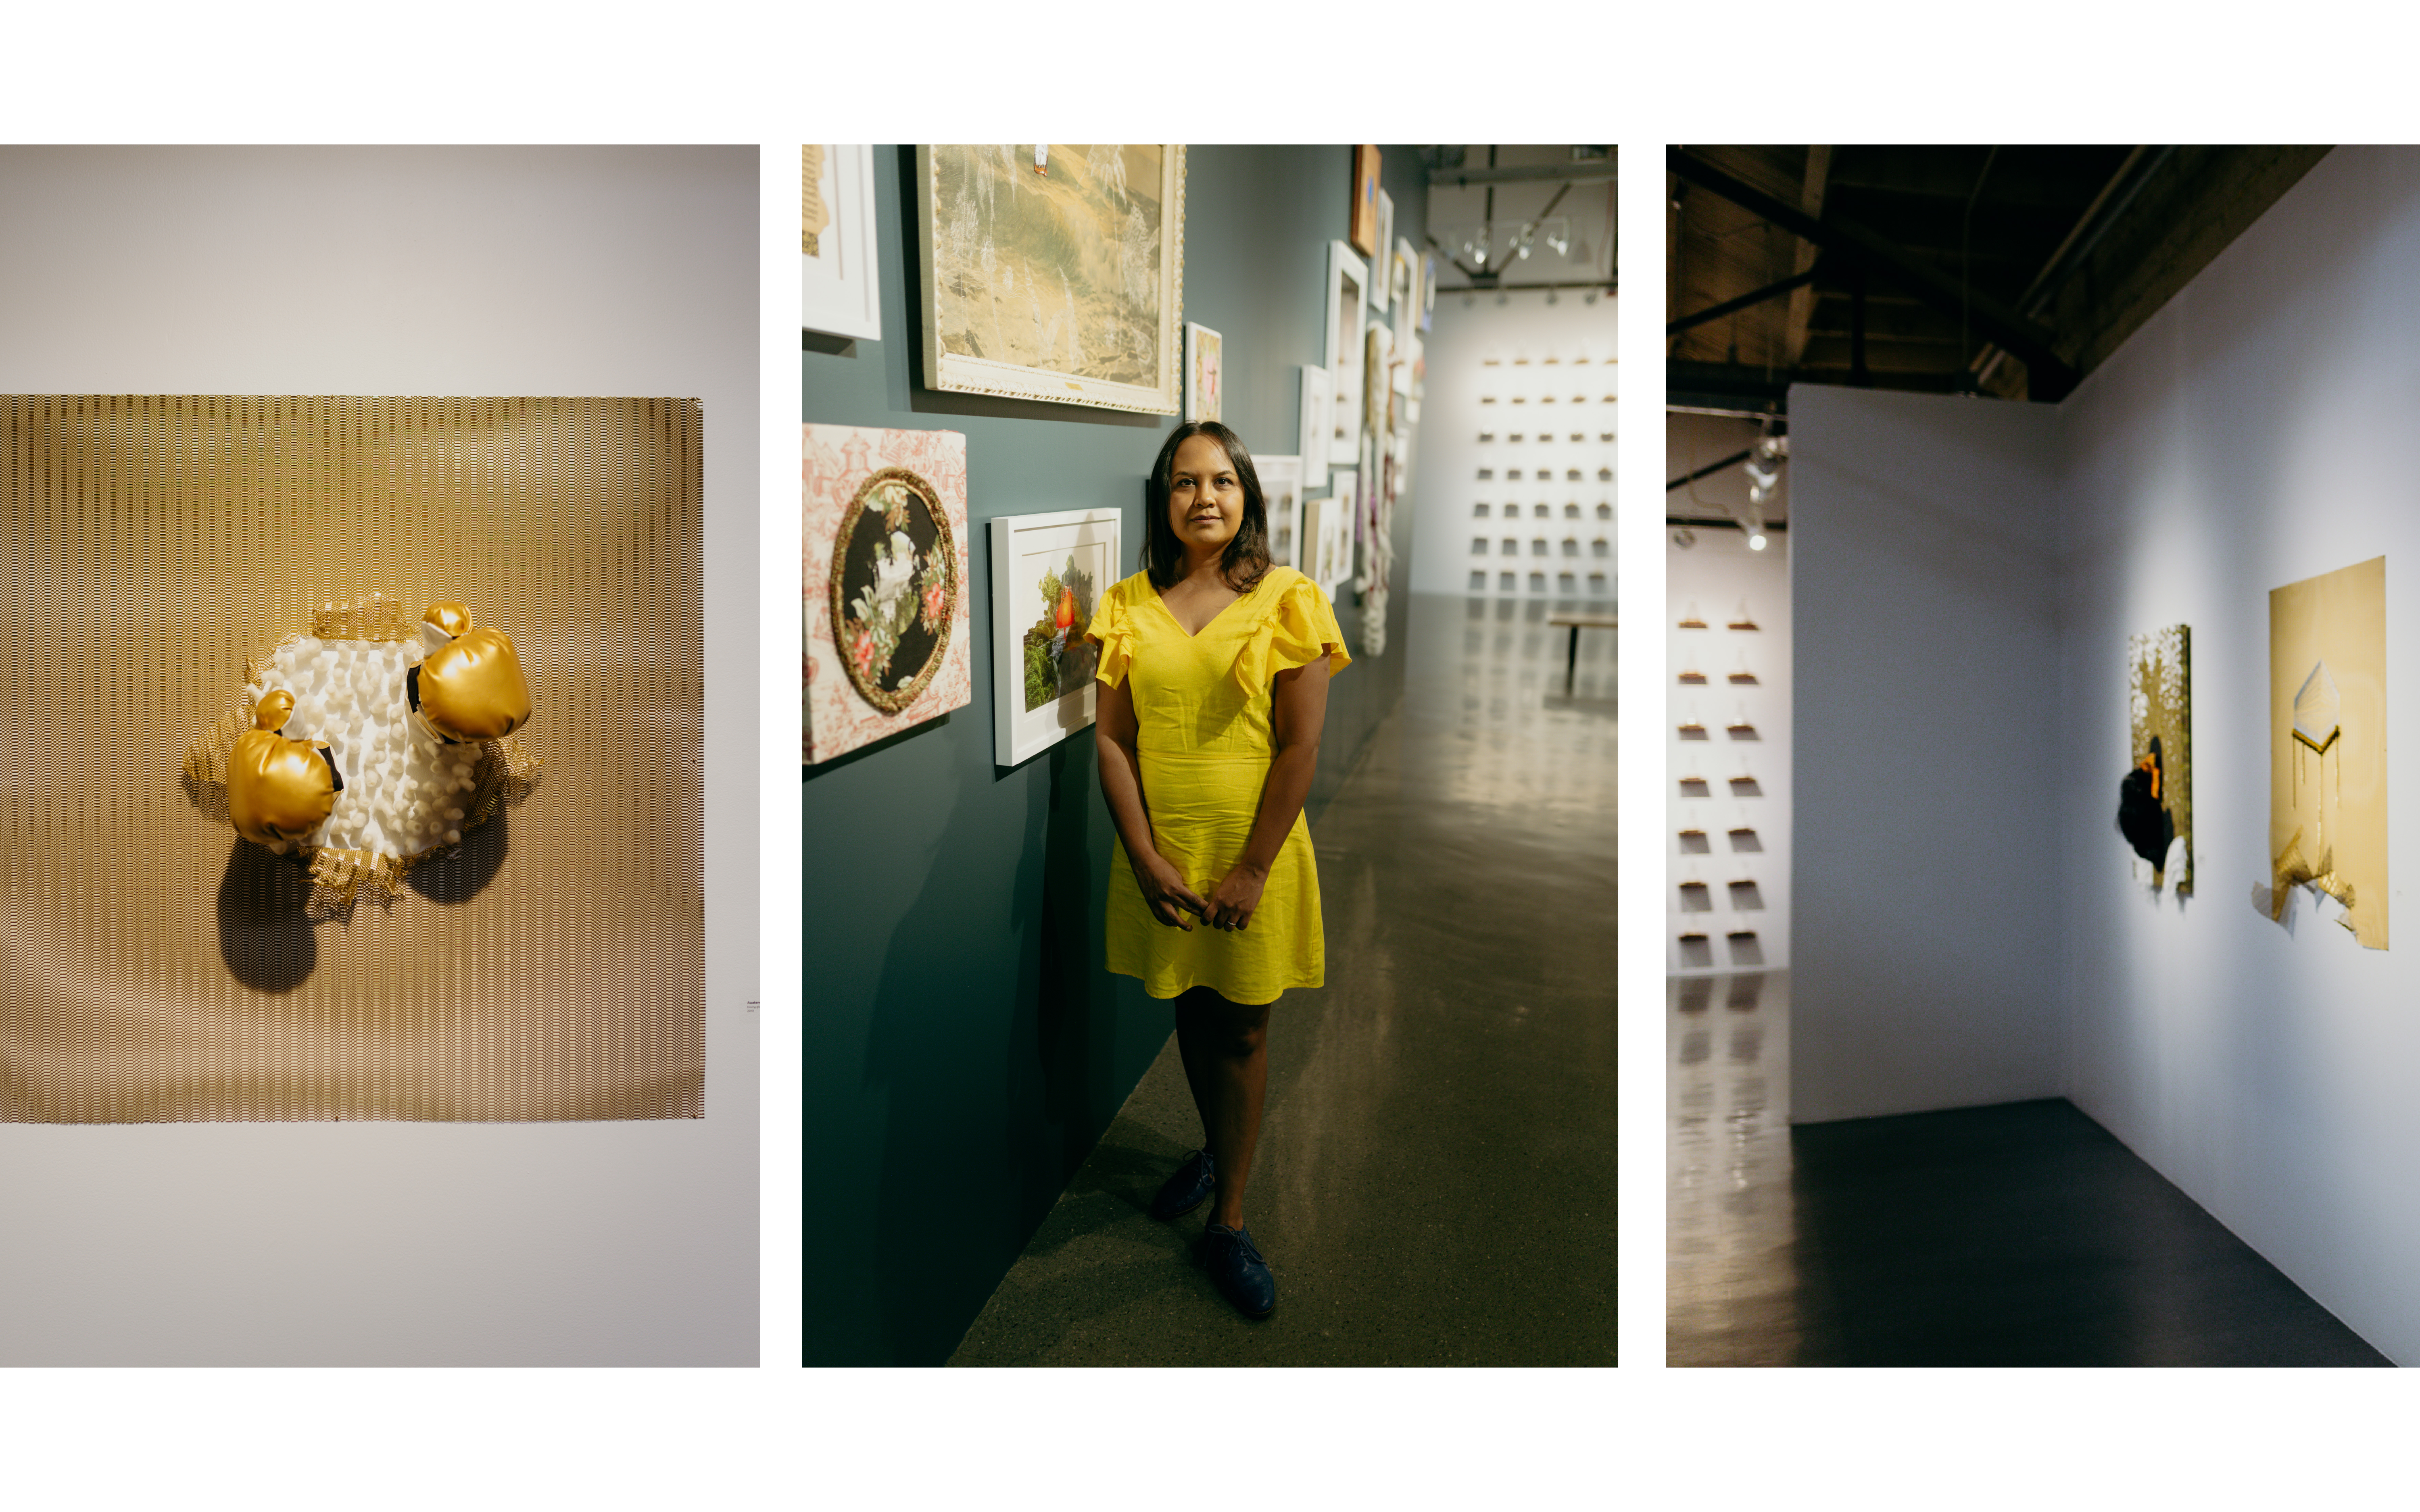 Suchitra poses in front of various artworks in an indoor gallery space. 